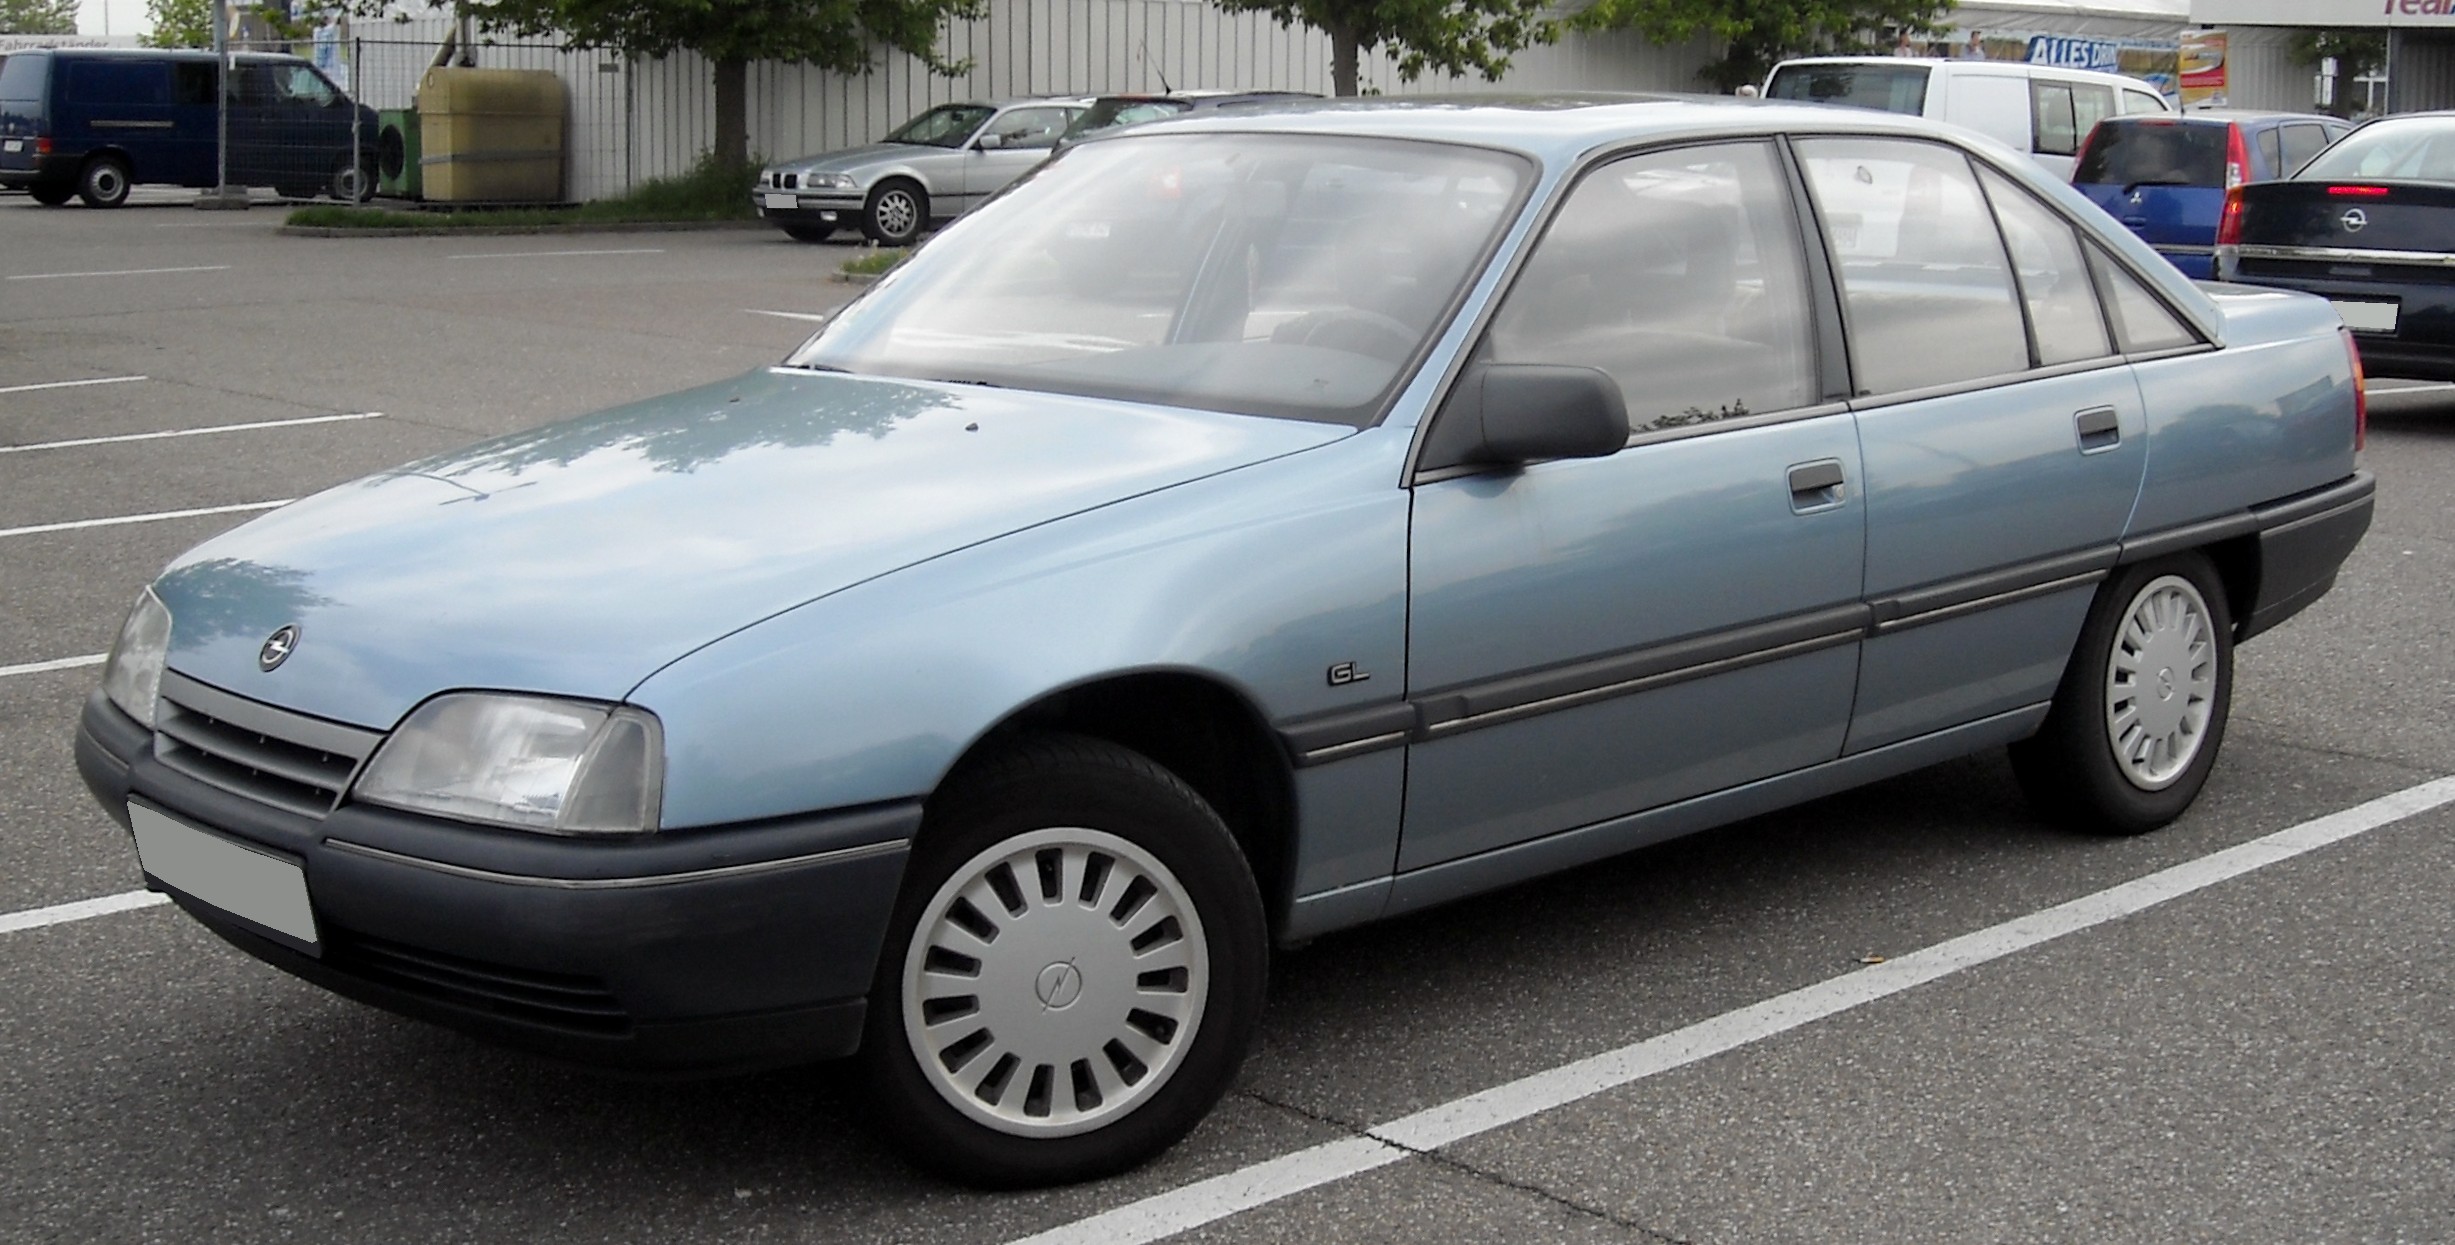 File:Opel Omega A front 20090430.jpg - Wikimedia Commons